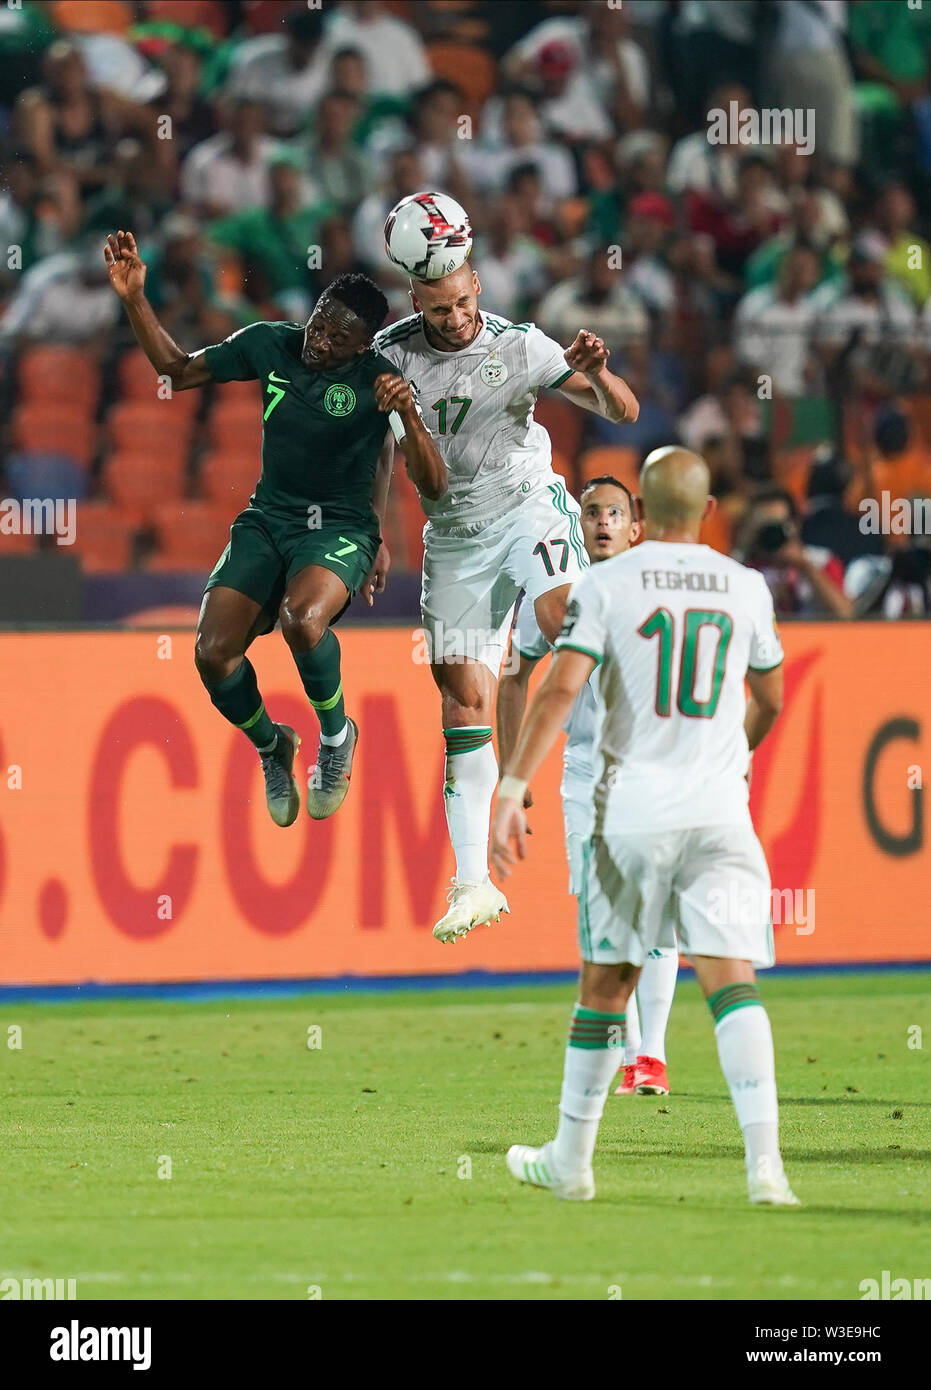 Cairo, Algeria, Egypt. 14th July, 2019. FRANCE OUT July 14, 2019: Adlane Guedioura of Algeria and Ahmed Musa of Nigeria challenging for the ball during the 2019 African Cup of Nations match between Algeria and Nigeria at the Cairo International Stadium in Cairo, Egypt. Ulrik Pedersen/CSM/Alamy Live News Stock Photo